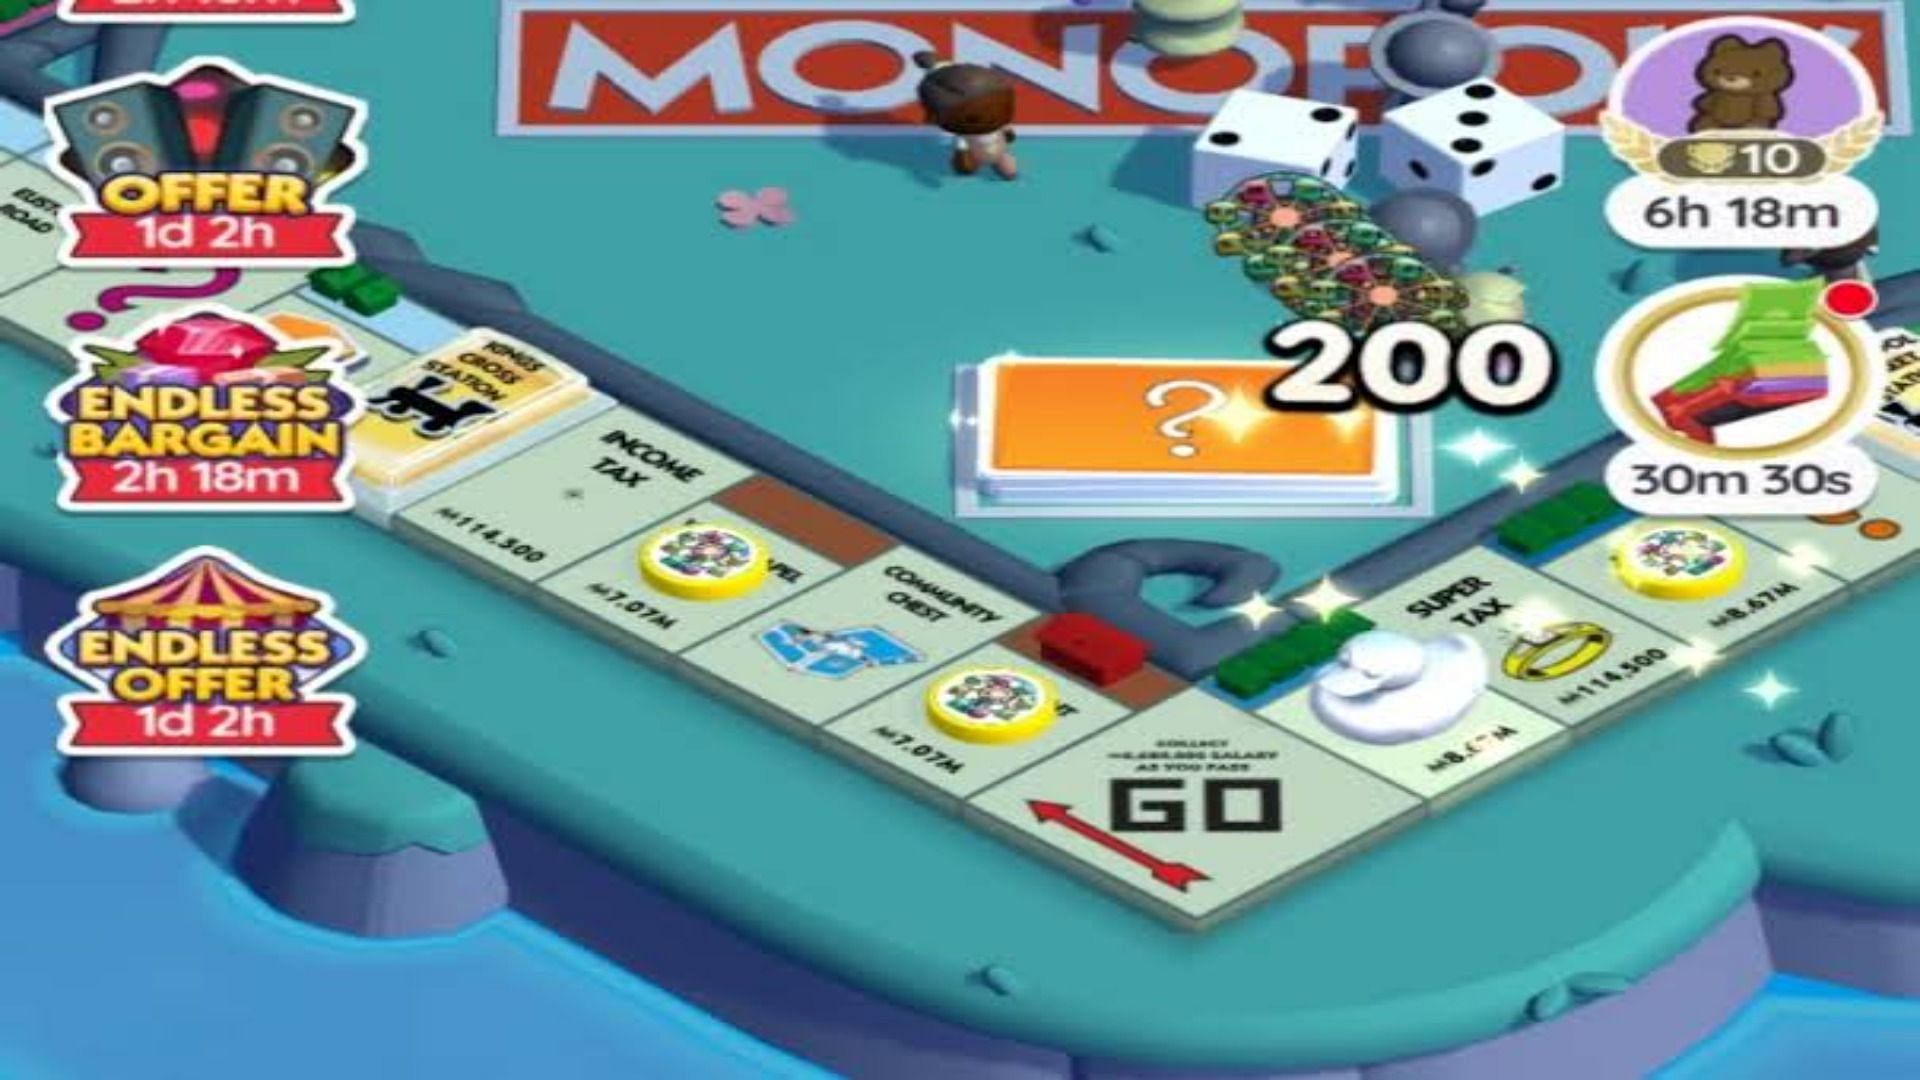 Monopoly Go daily events 